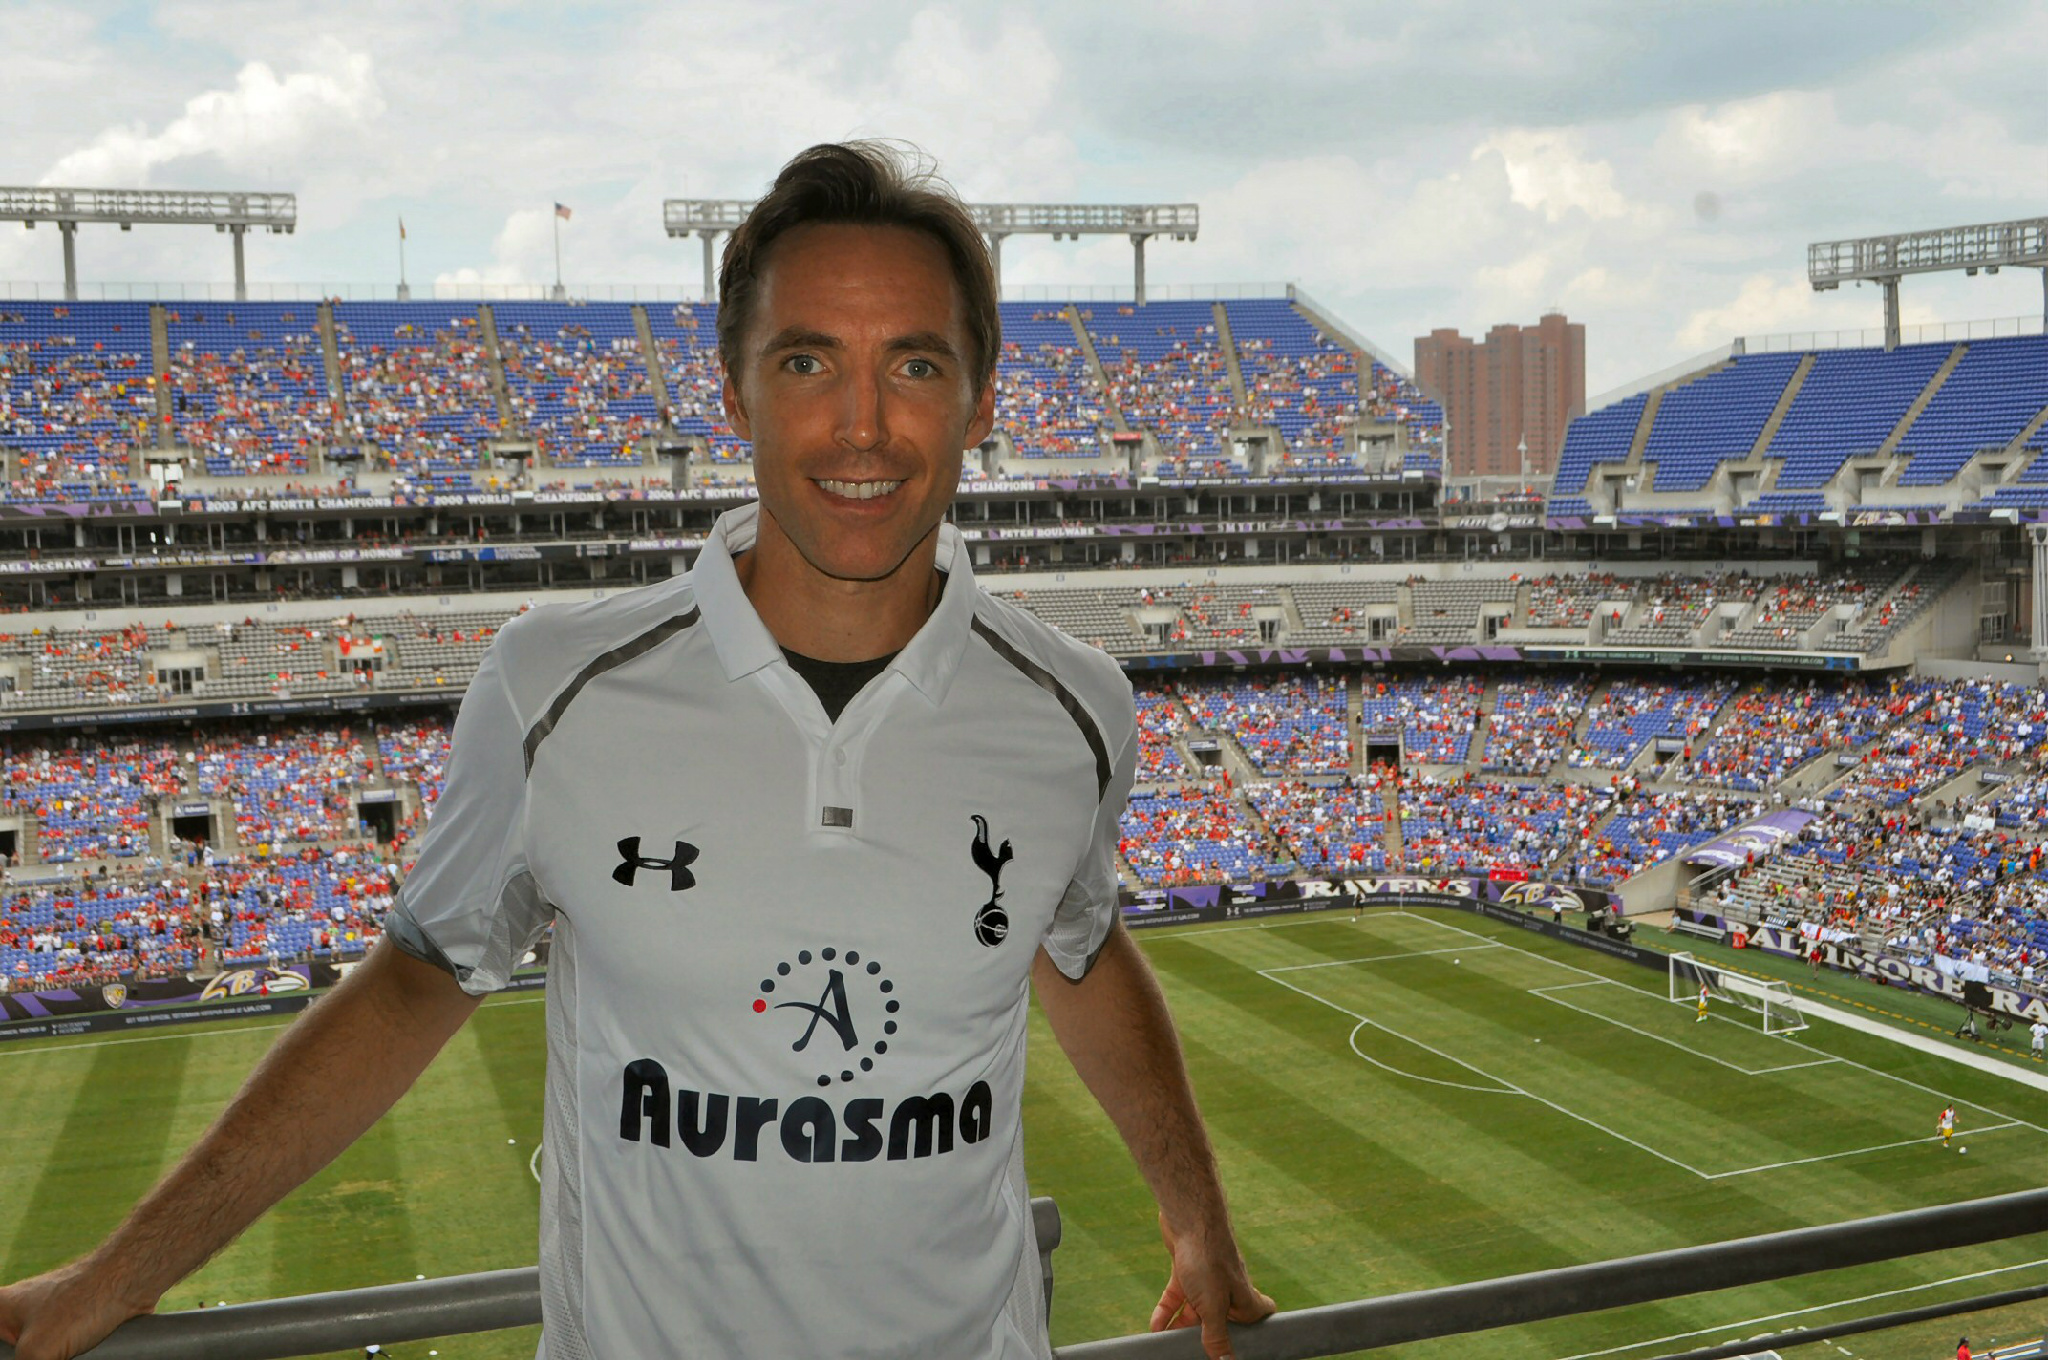 Tottenham Hotspur Picture Special Nba Legend And Spurs Fan Stevenash At Today S Game In Baltimore Great To See You Steve Http T Co 539zgq53 Twitter